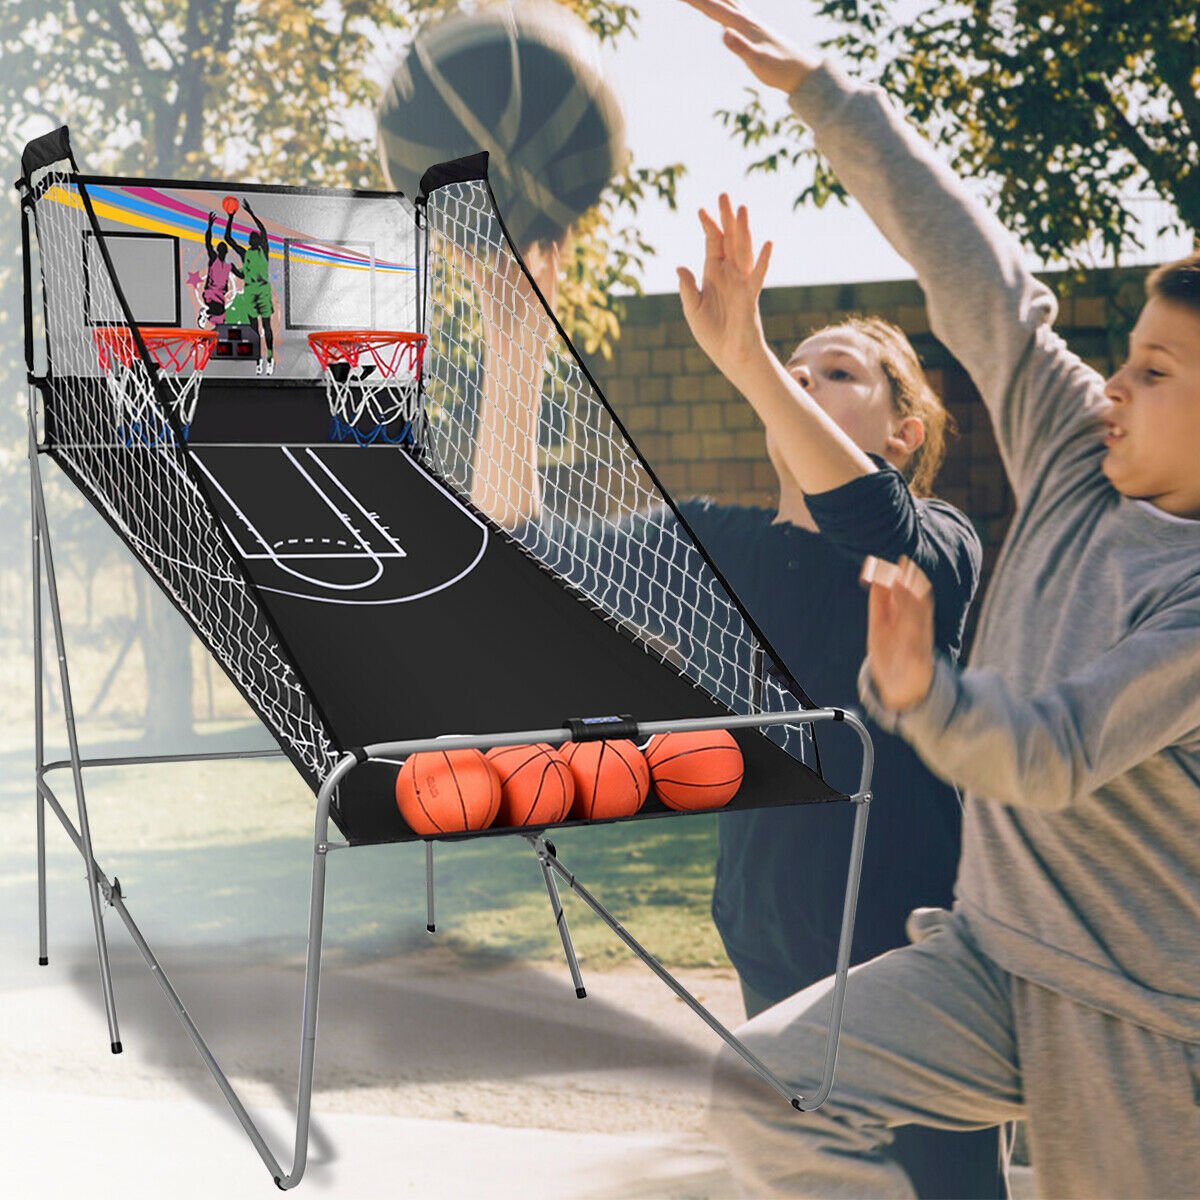 Buy the Ultimate Indoor Basketball Arcade Game - Fun for All Ages!